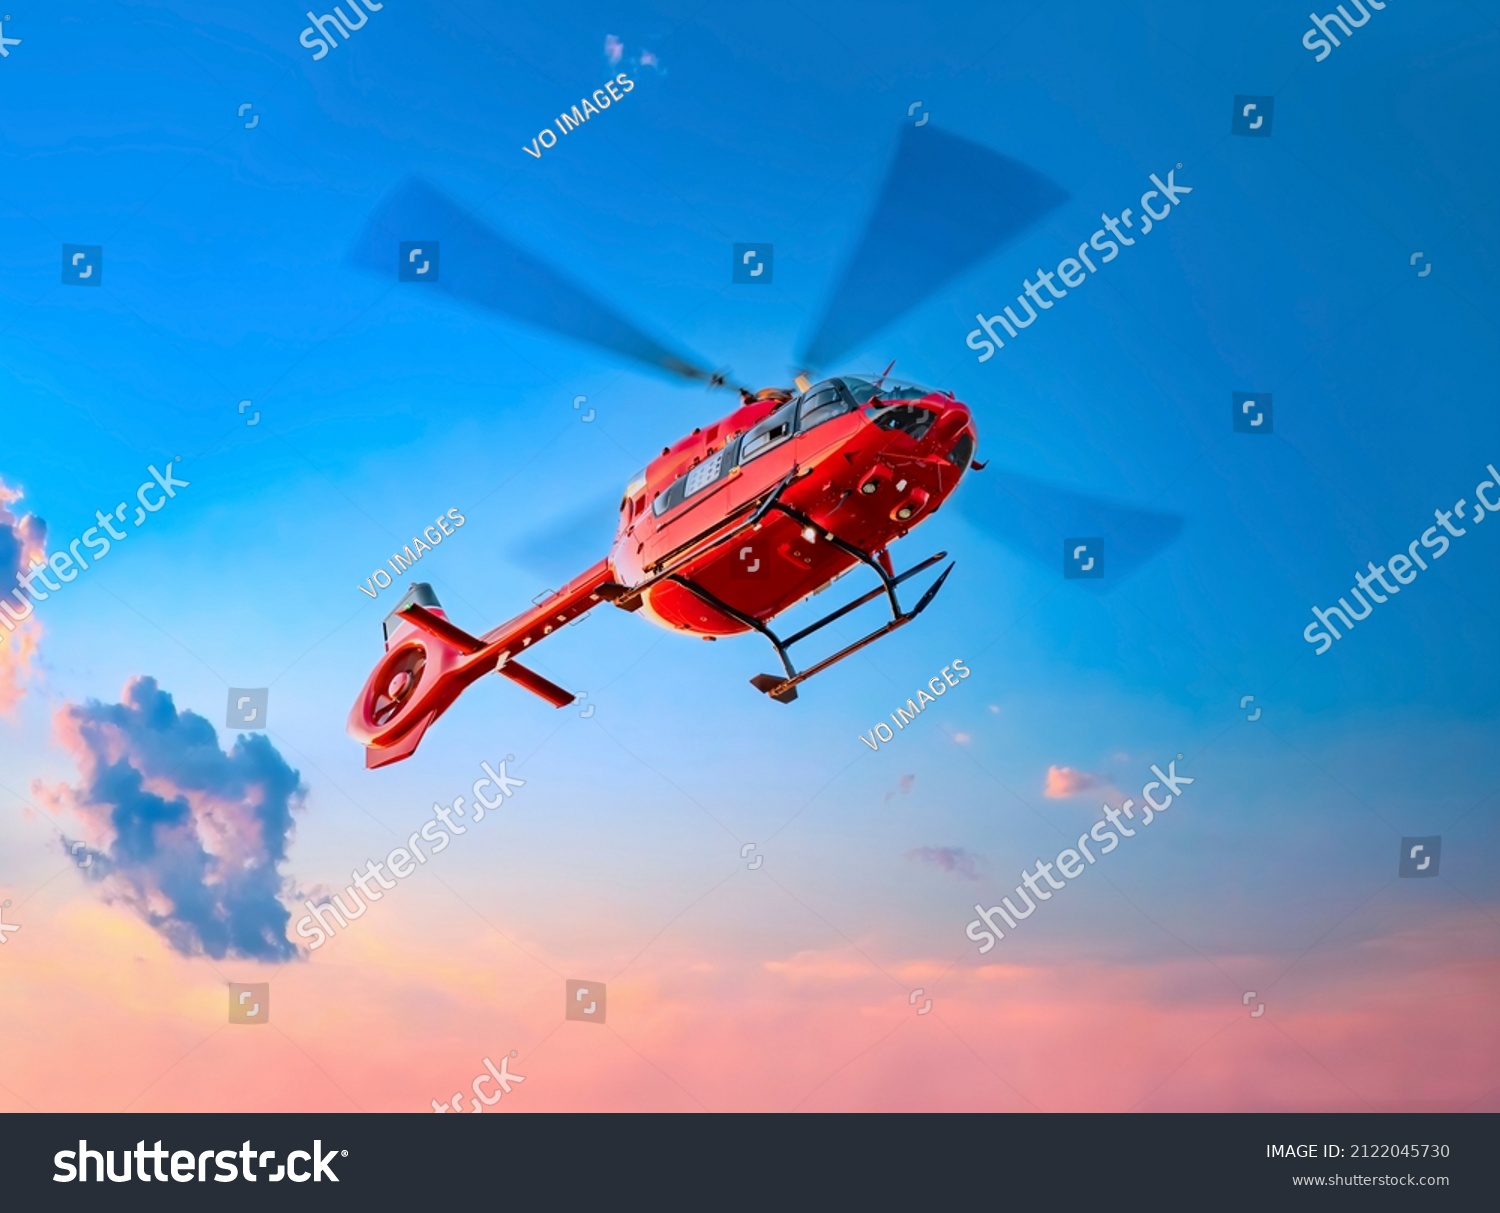 Red color helicopter in the air. Great photo on the theme of air medical service, air transportation,  air ambulance,  fast city transportation or helicopter tours.  #2122045730